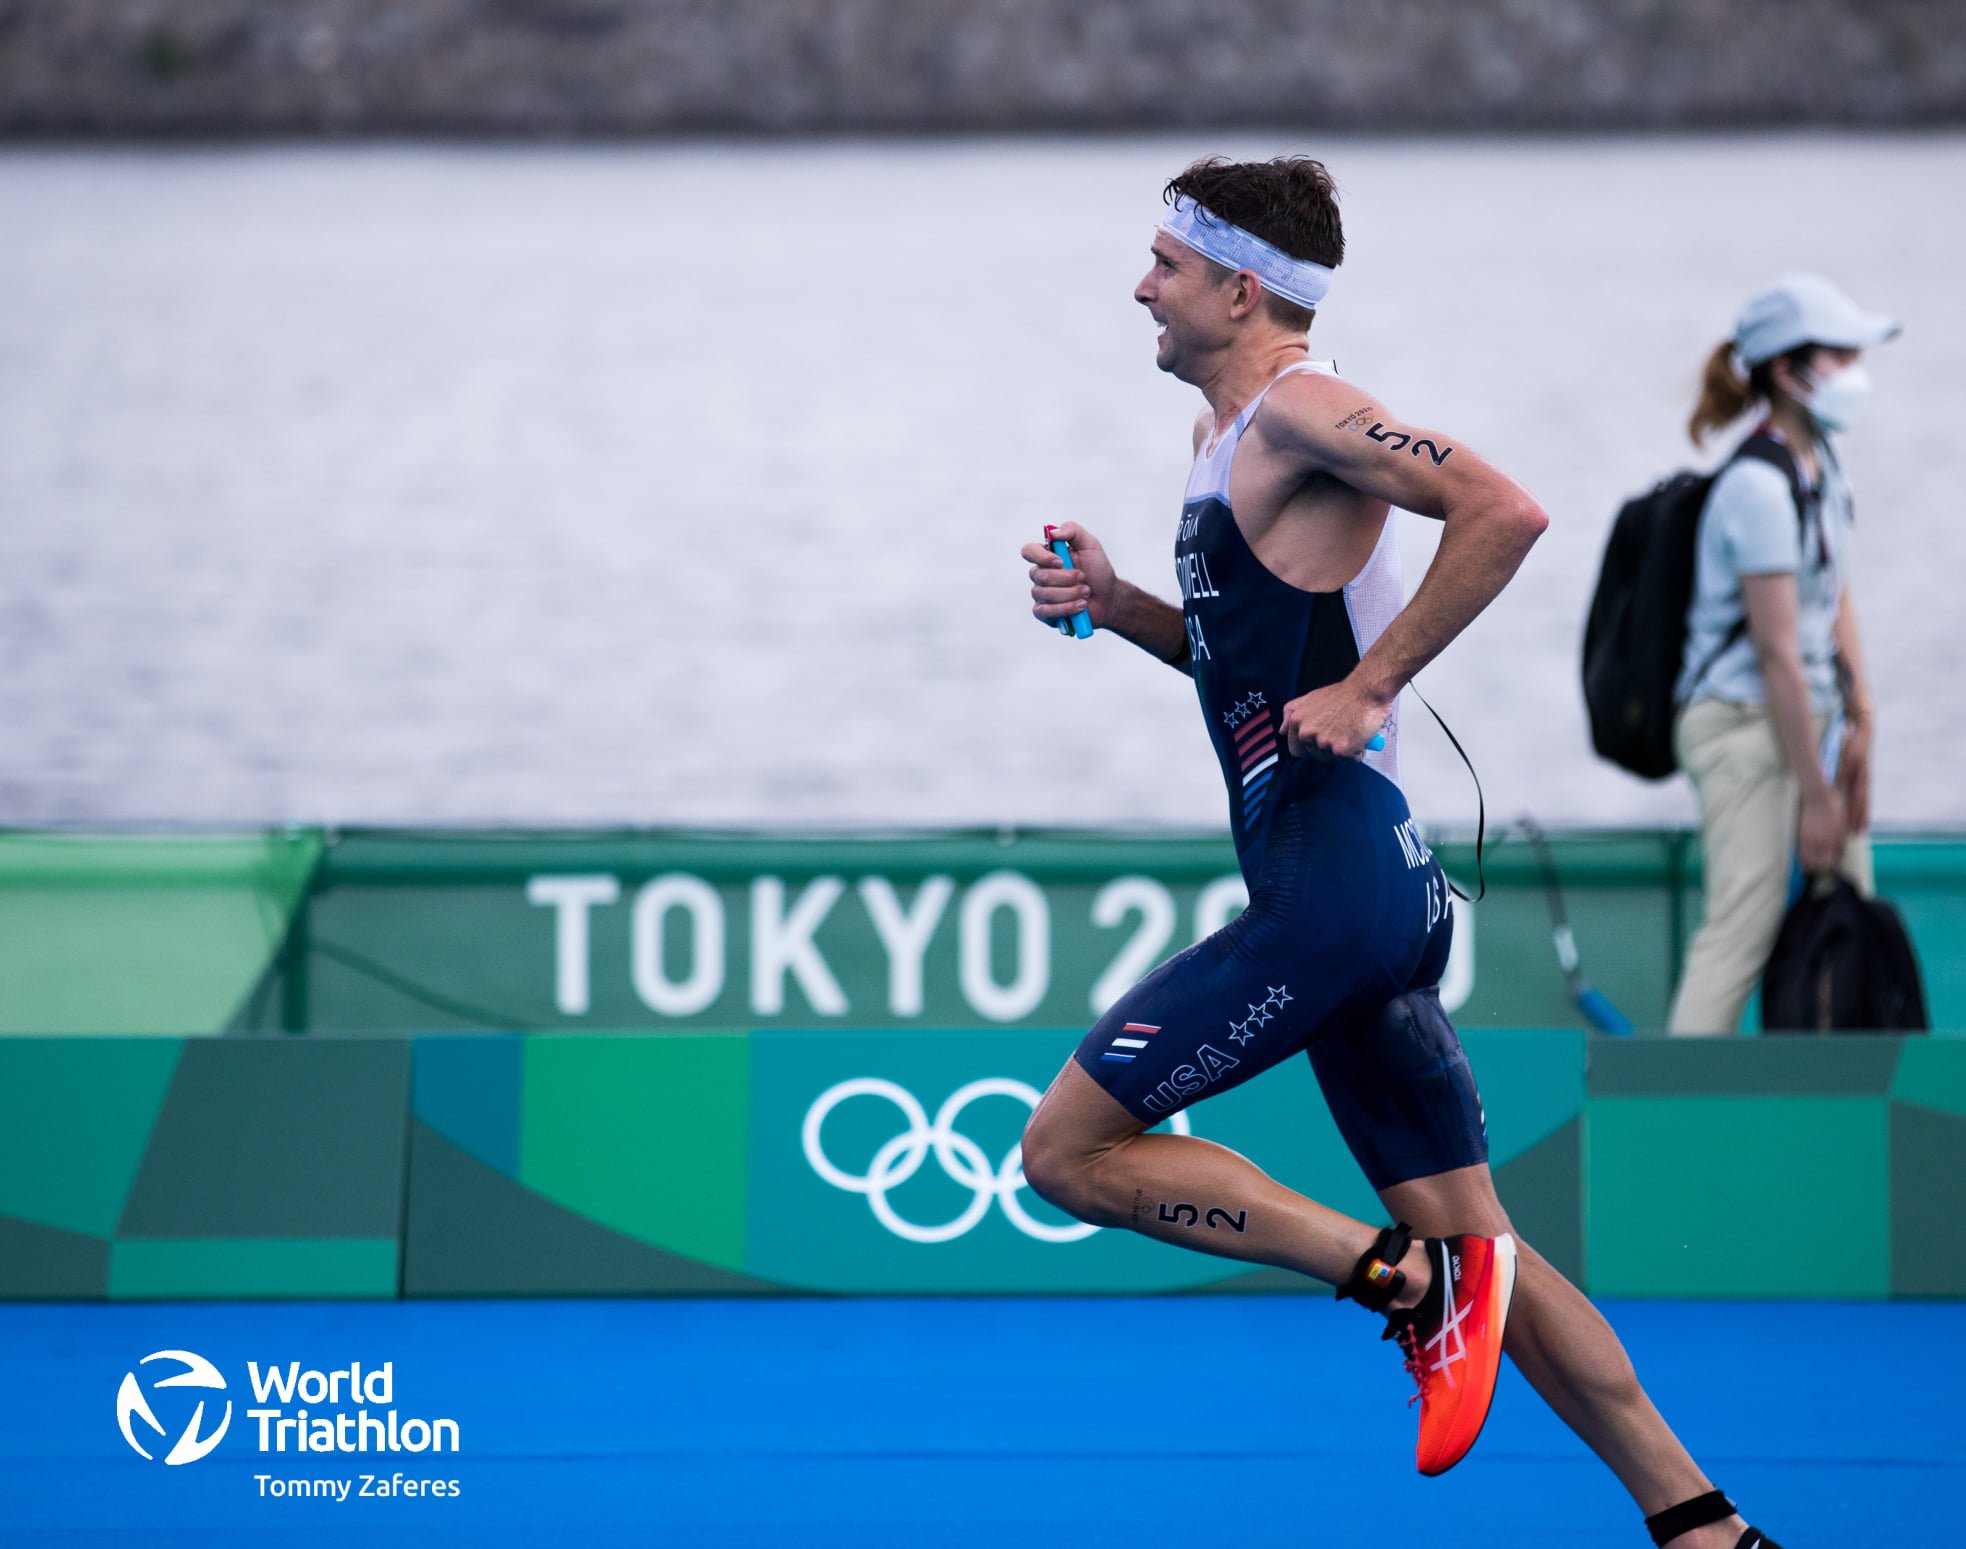 Kevin McDowell running to 6th at the Tokyo Olympics!